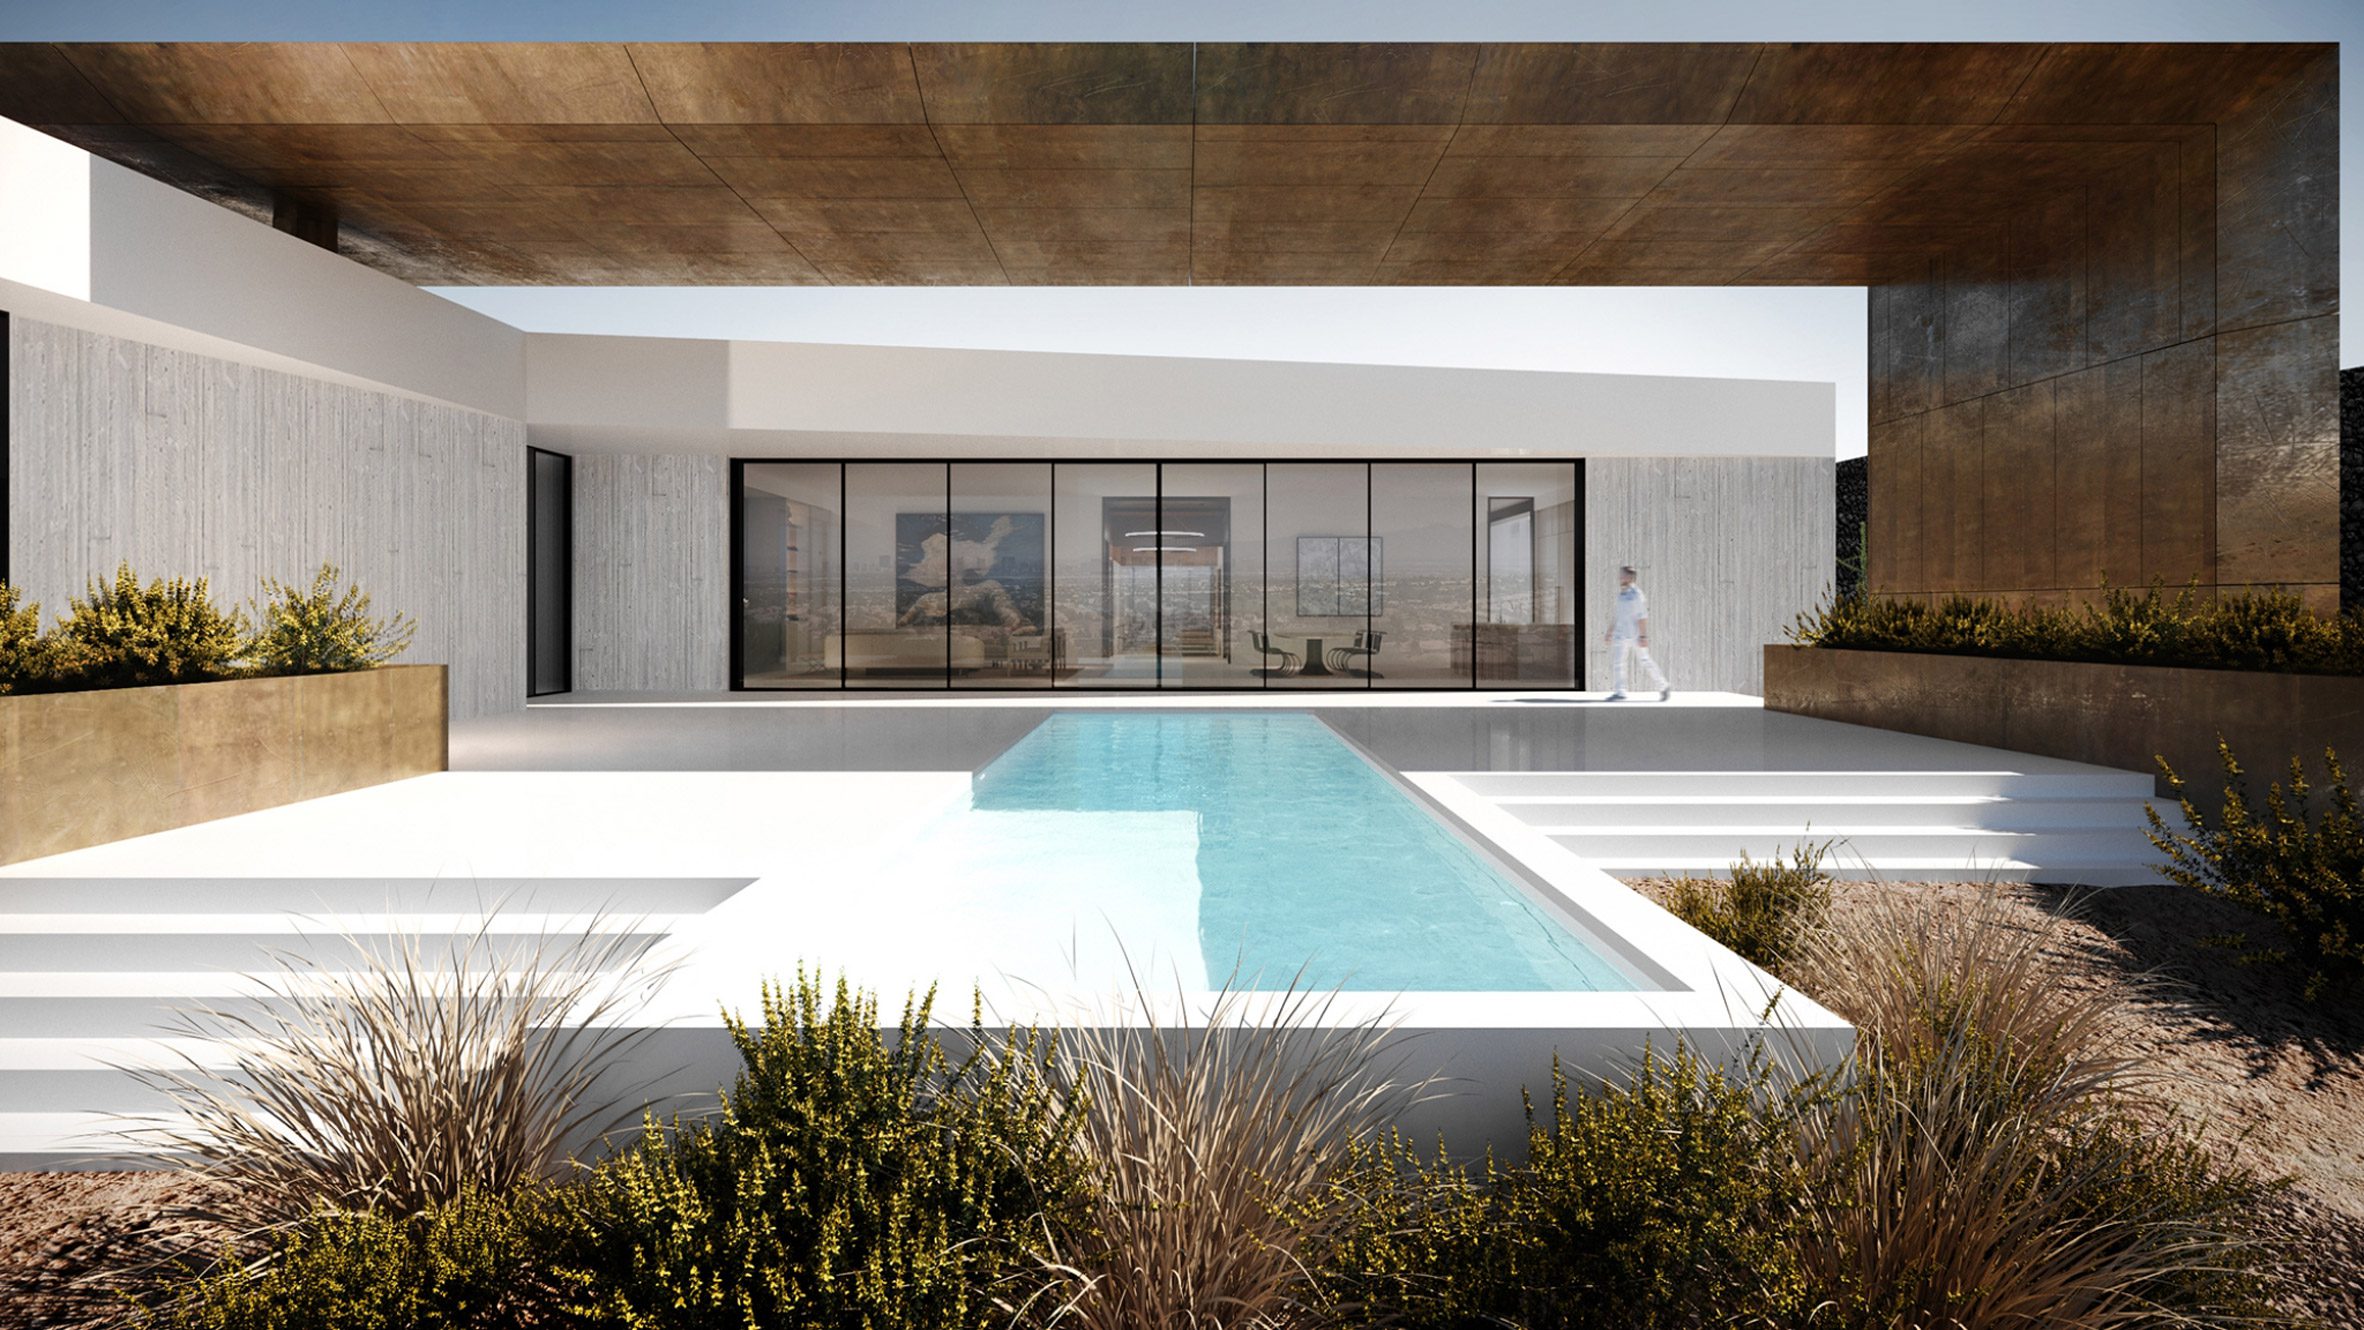 Rectilinear swimming pool at house in the desert